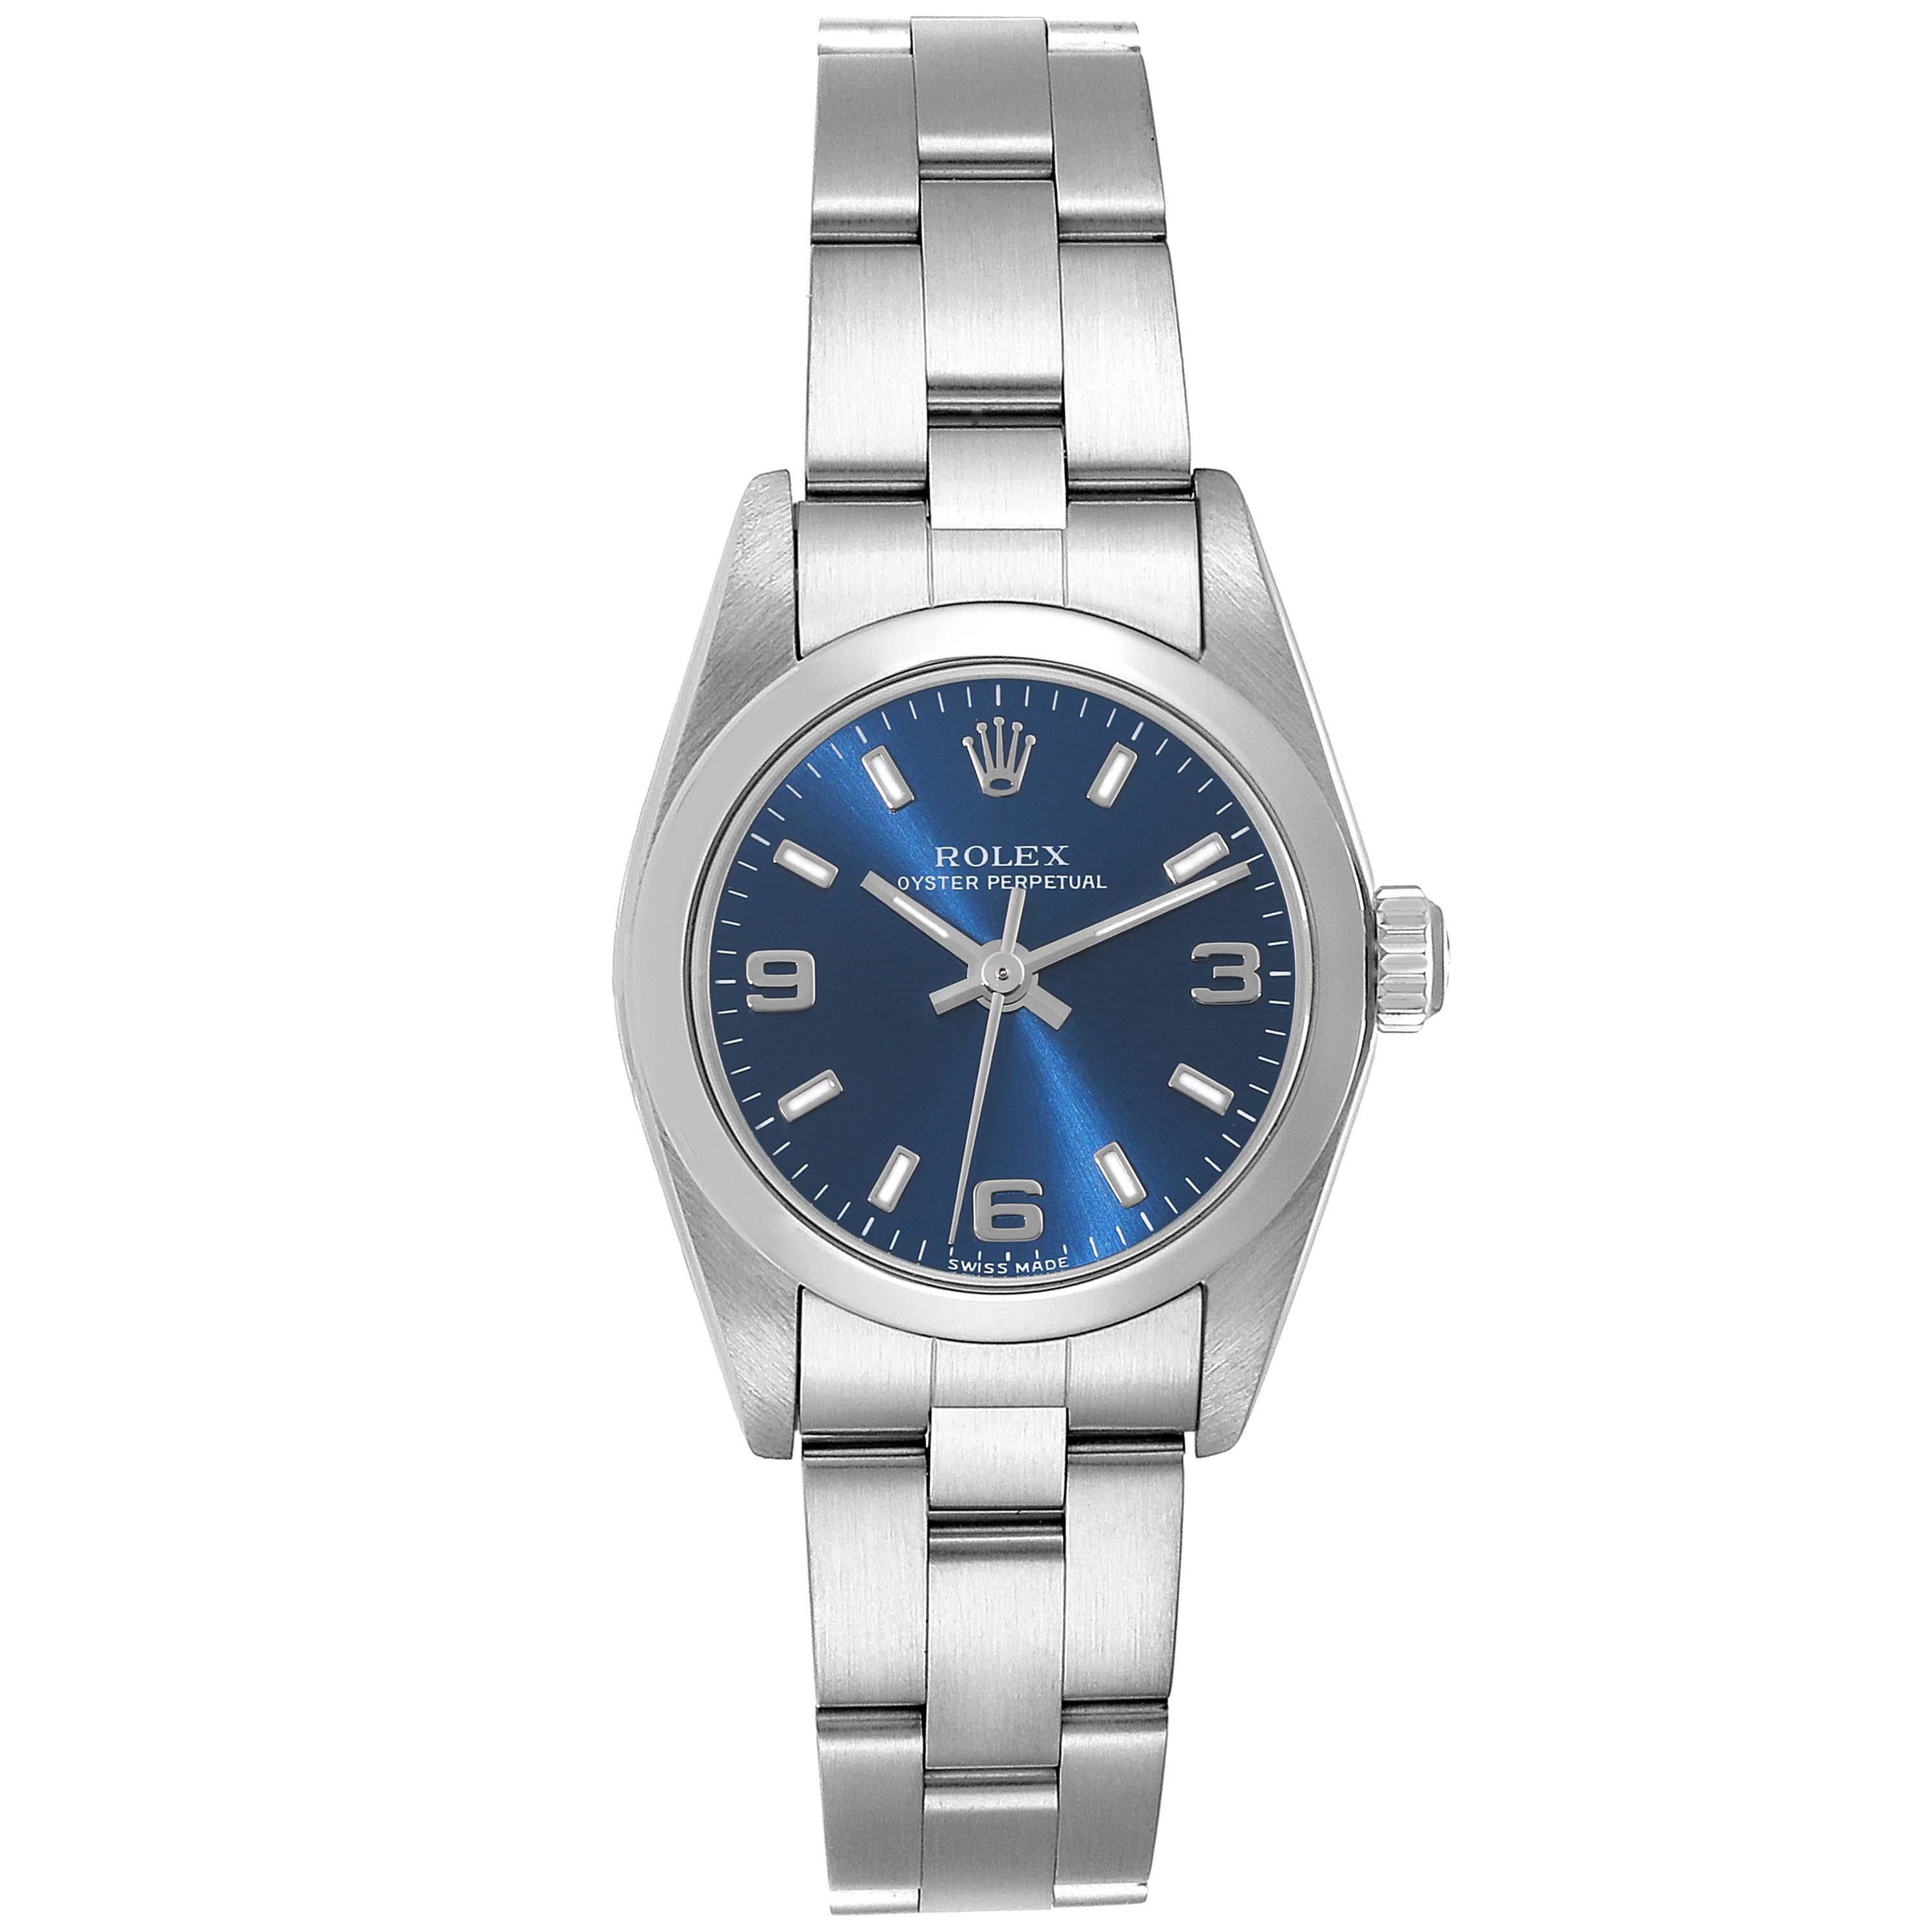 Rolex Oyster Perpetual Nondate Blue Dial Steel Ladies Watch 76080. Officially certified chronometer self-winding movement. Stainless steel oyster case 24.0 mm in diameter. Rolex logo on a crown. Stainless steel smooth domed bezel. Scratch resistant